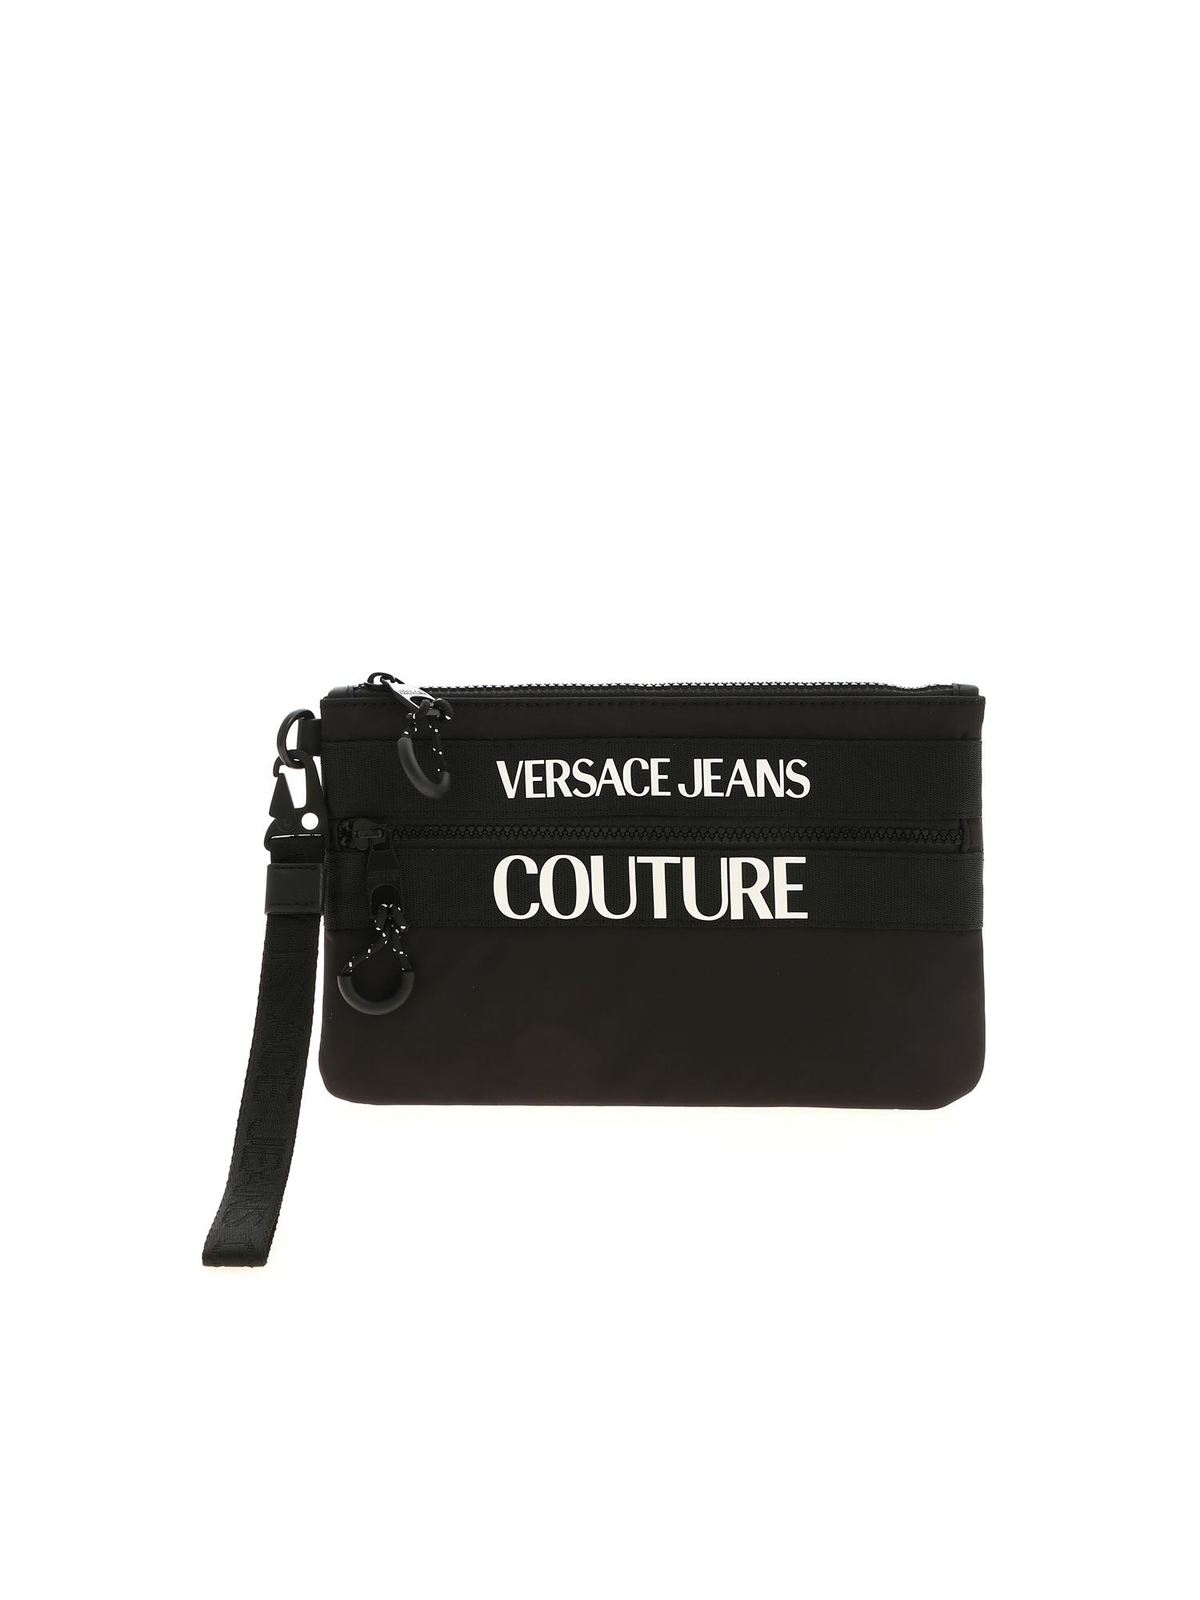 VERSACE JEANS COUTURE RUBBERIZED LOGO CLUTCH IN BLACK